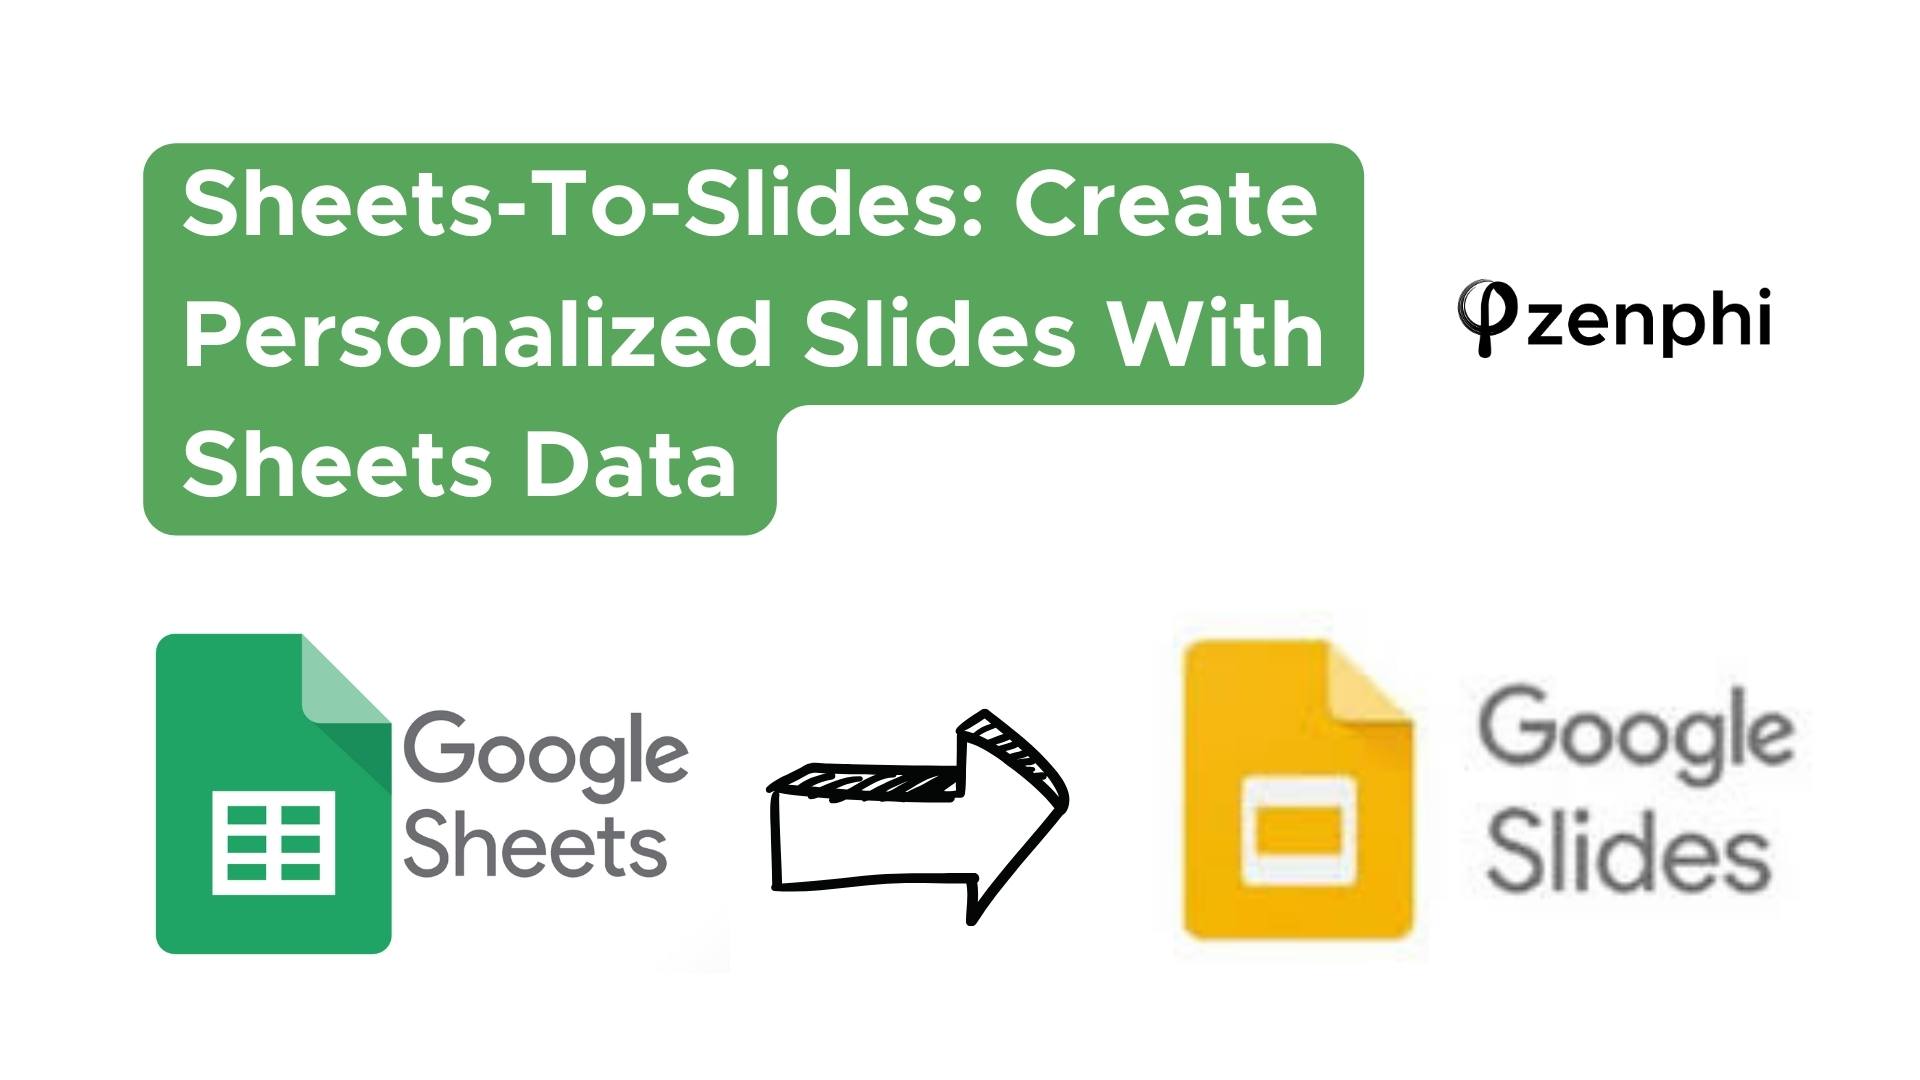 sheets-to-slides